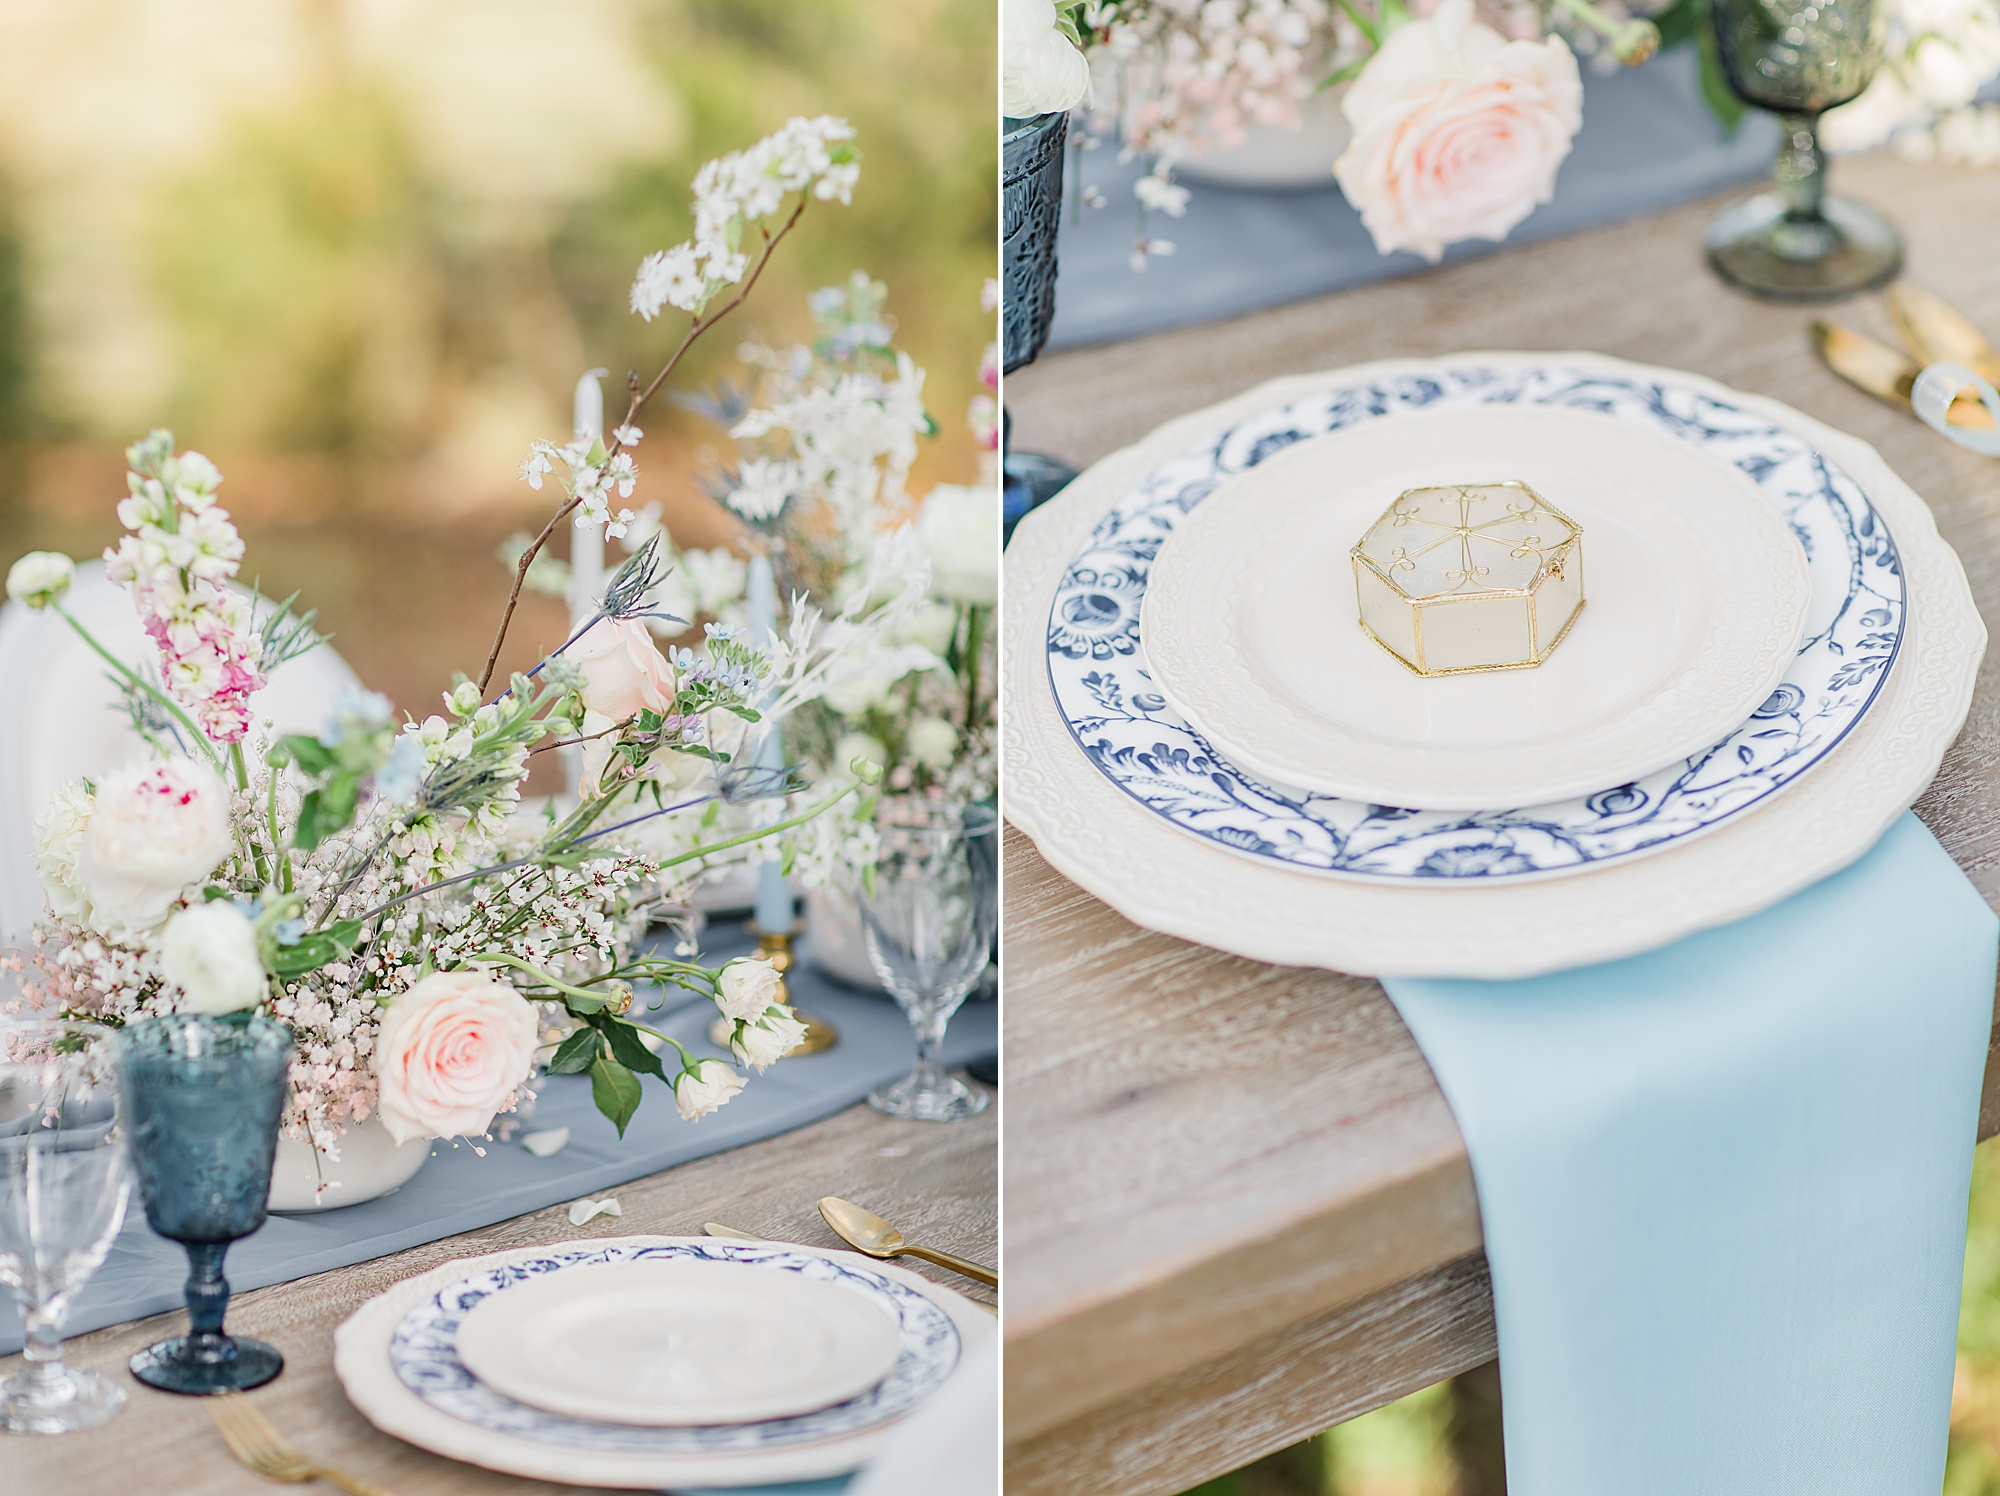 place settings with vintage plates